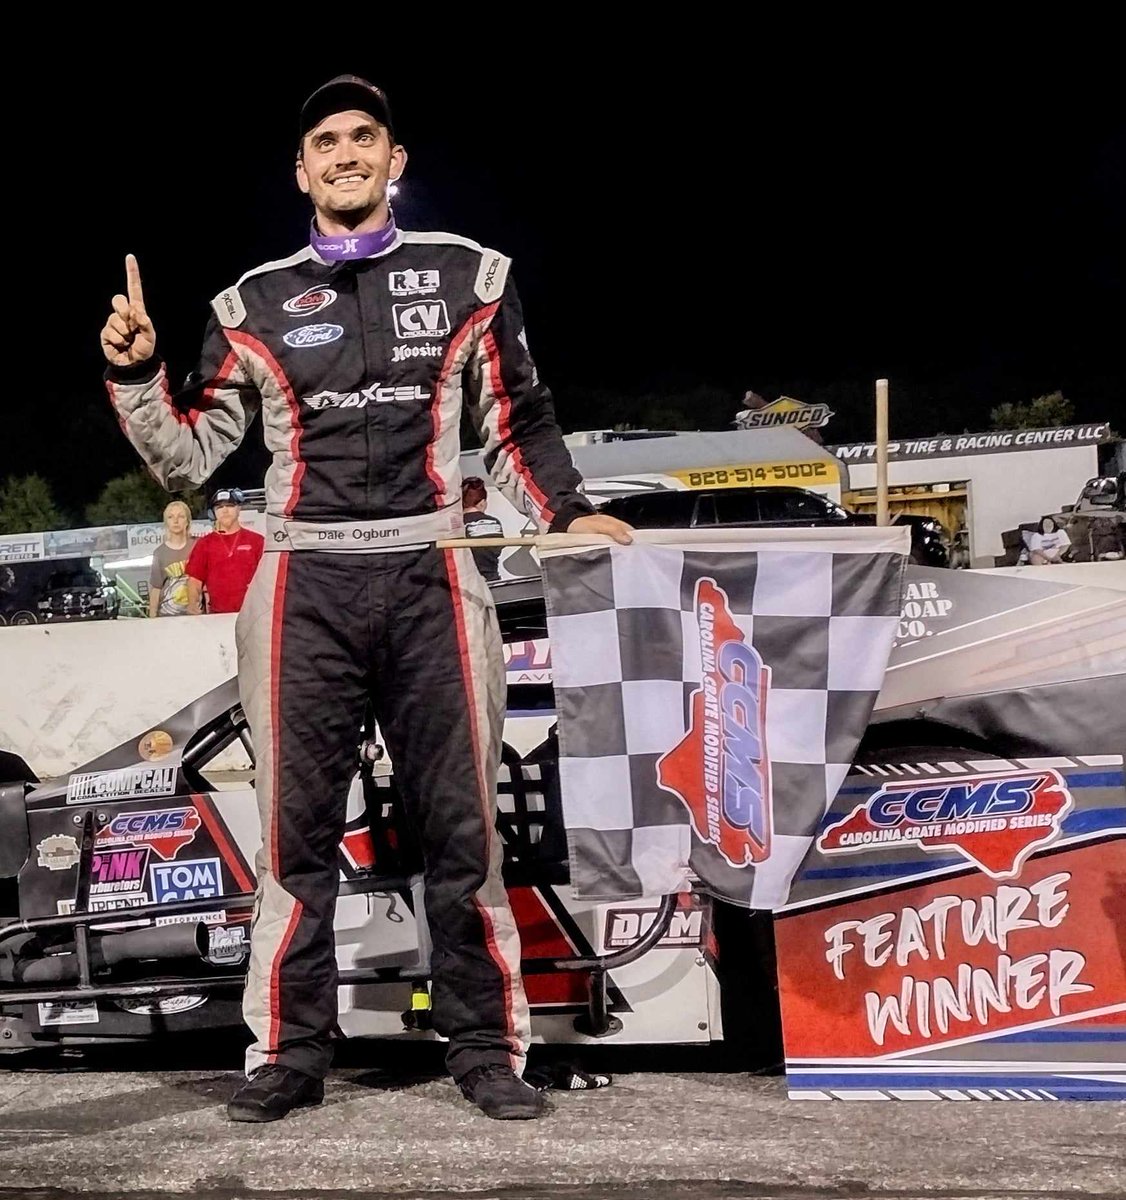 .@GeorgeP33072782 and @DaleOgburn score big @Cplms09 / Carolina Crate wins at @hickoryspeedway. READ MORE: m.facebook.com/story.php?stor…